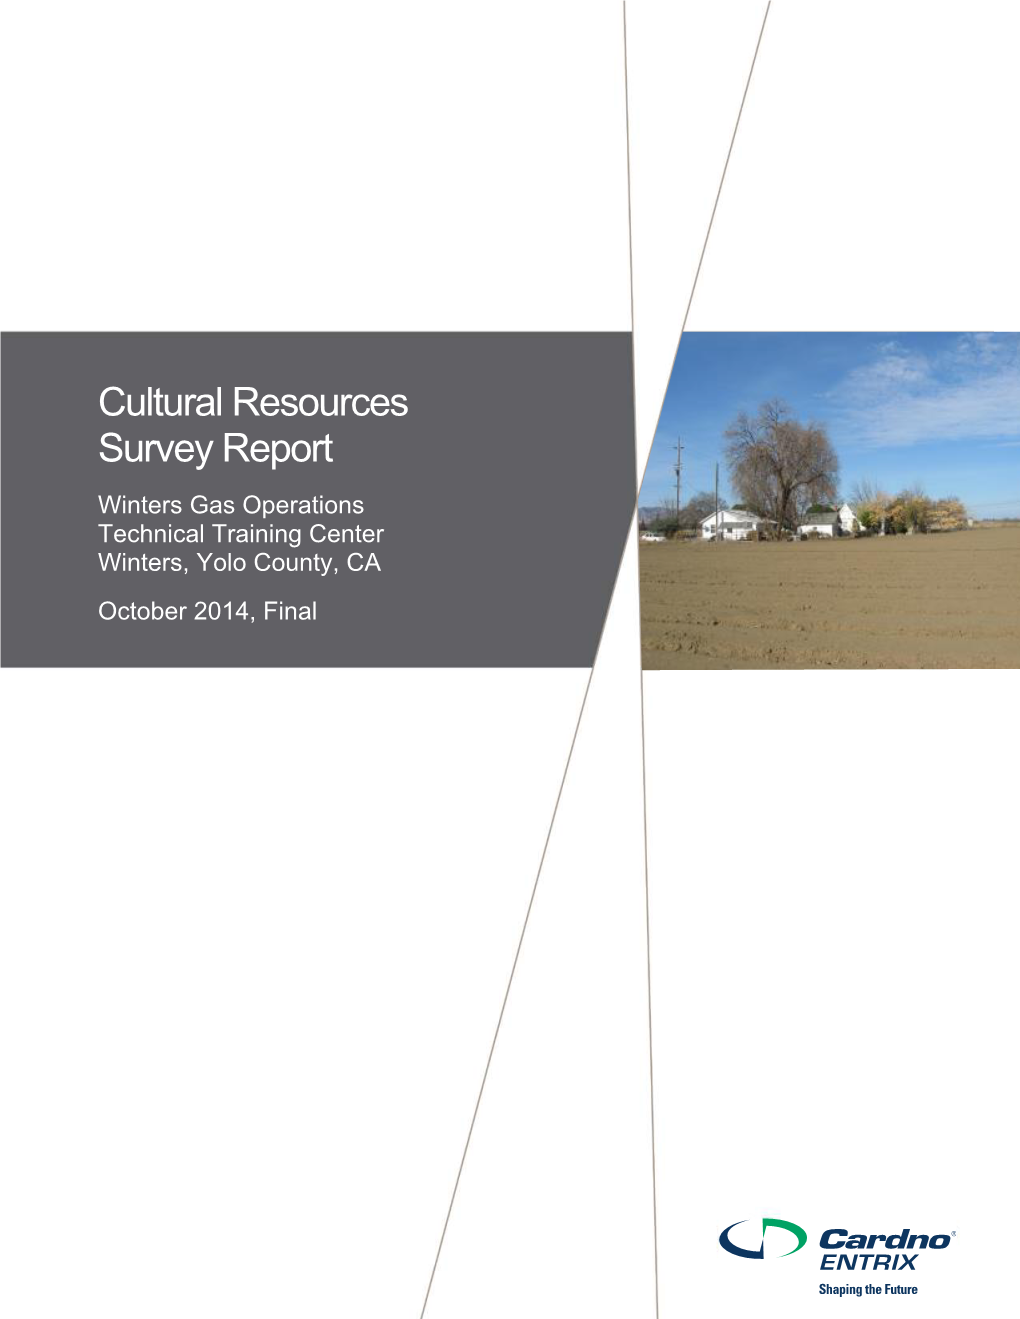 Cultural Resources Survey Report Winters Gas Operations Technical Training Center Winters, Yolo County, CA October 2014, Final